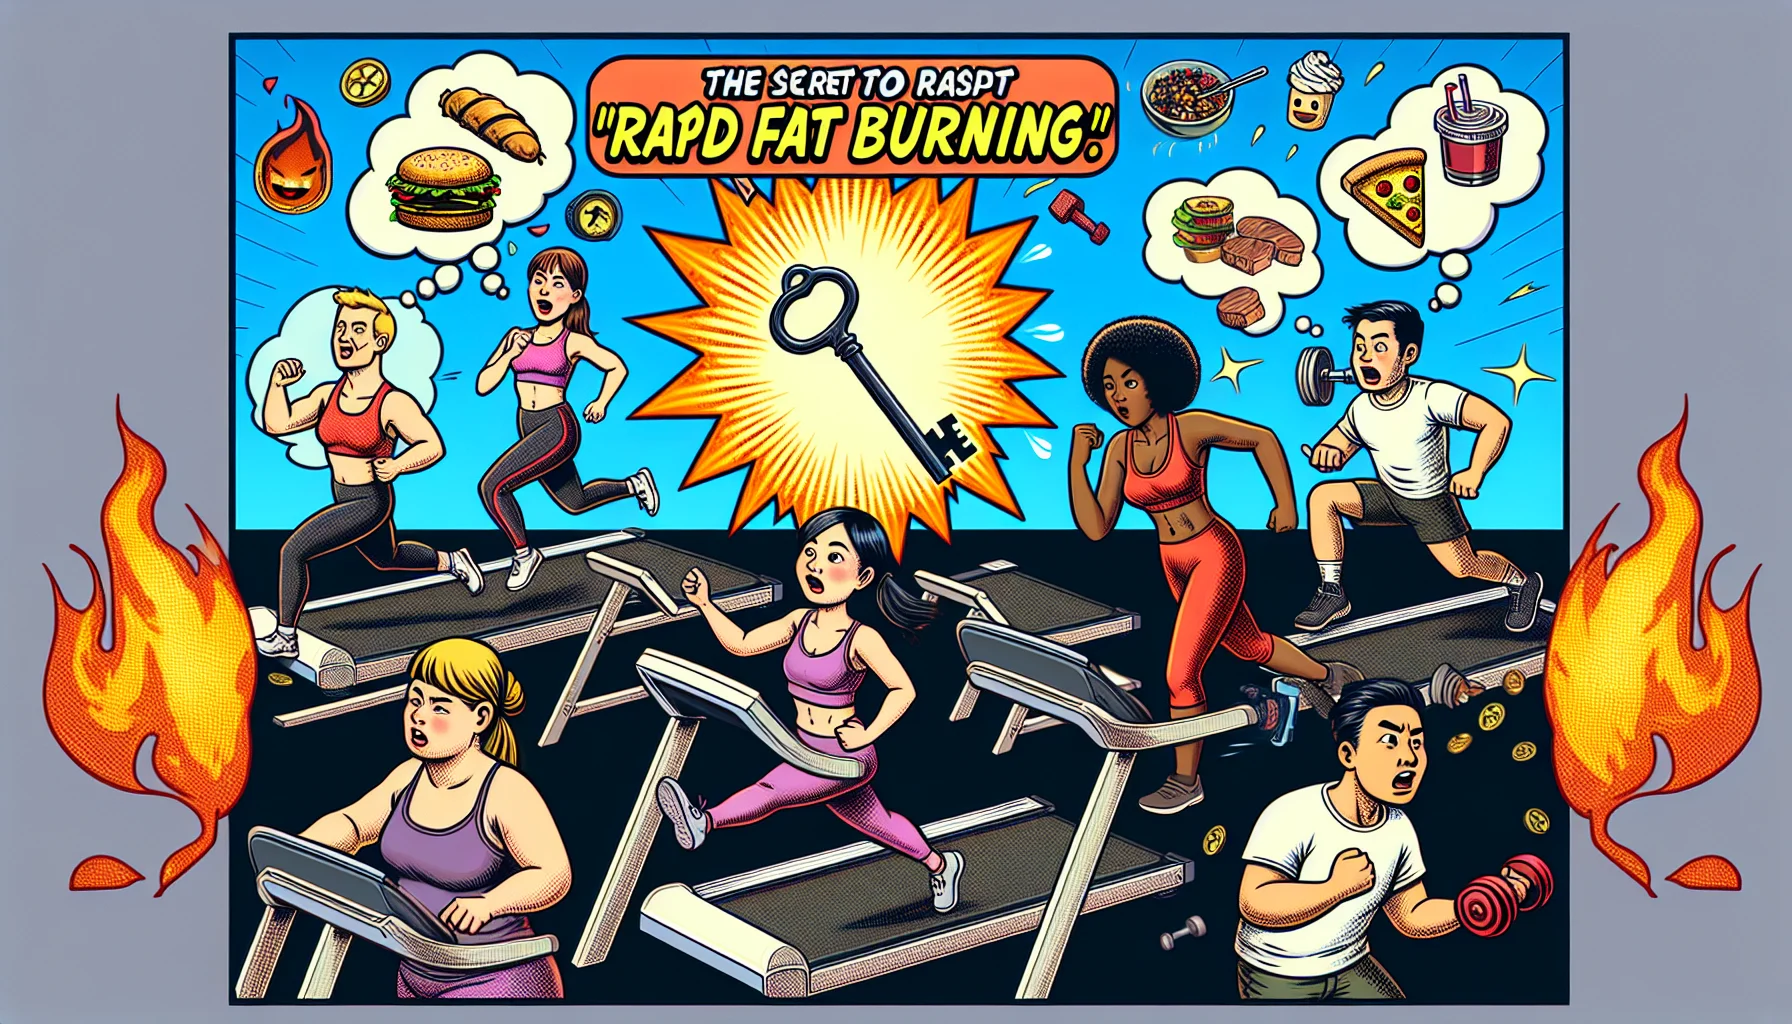 Create an amusing and realistic image demonstrating the 'secret to rapid fat burning'. There is a plethora of fitness equipment scattered around. A diverse group of fitness enthusiasts are present: a Caucasian woman on the treadmill, a Hispanic man lifting weights, an Asian woman doing yoga, and a Black man on the stationary bike. Each of them display expressions of determination and surprise as an illuminating, cartoon-ish key hovers above them, symbolizing the 'secret' to their goals. Surrounding them are comic-style thought bubbles with miniature humorous depictions of junk food sweating it out like they are.